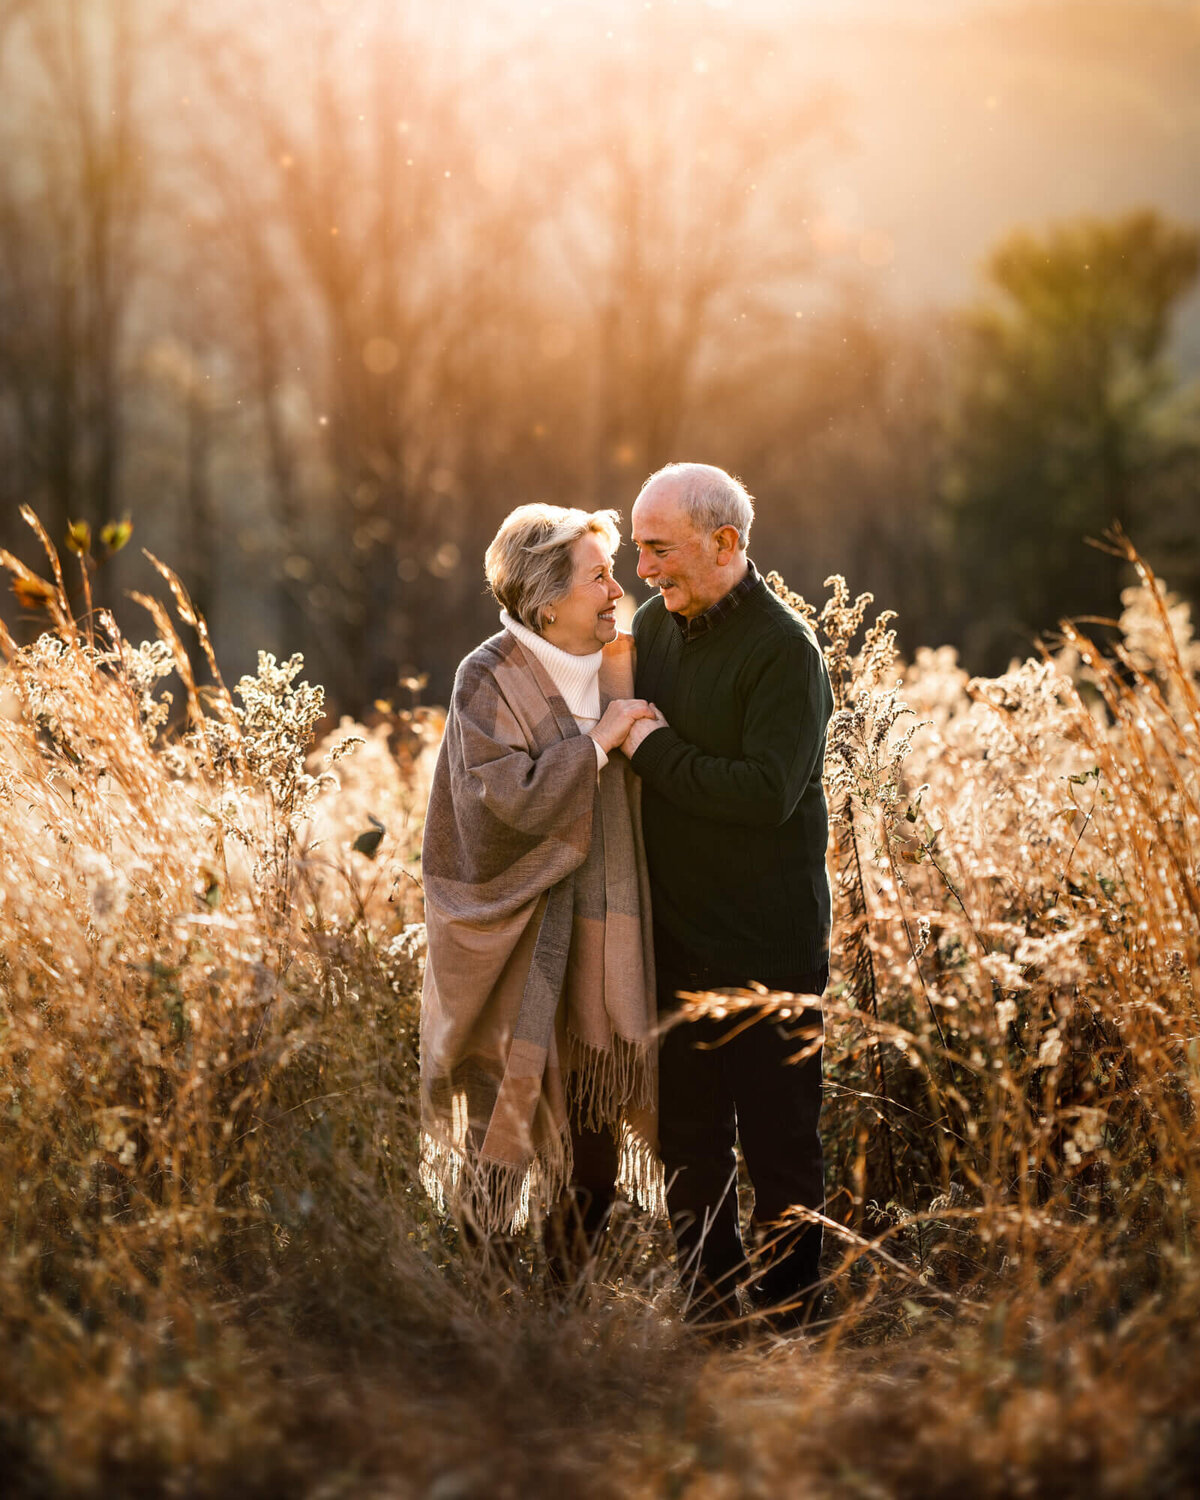 A couple in their golden years snuggling and laughing in tall yelllow grass at sunset